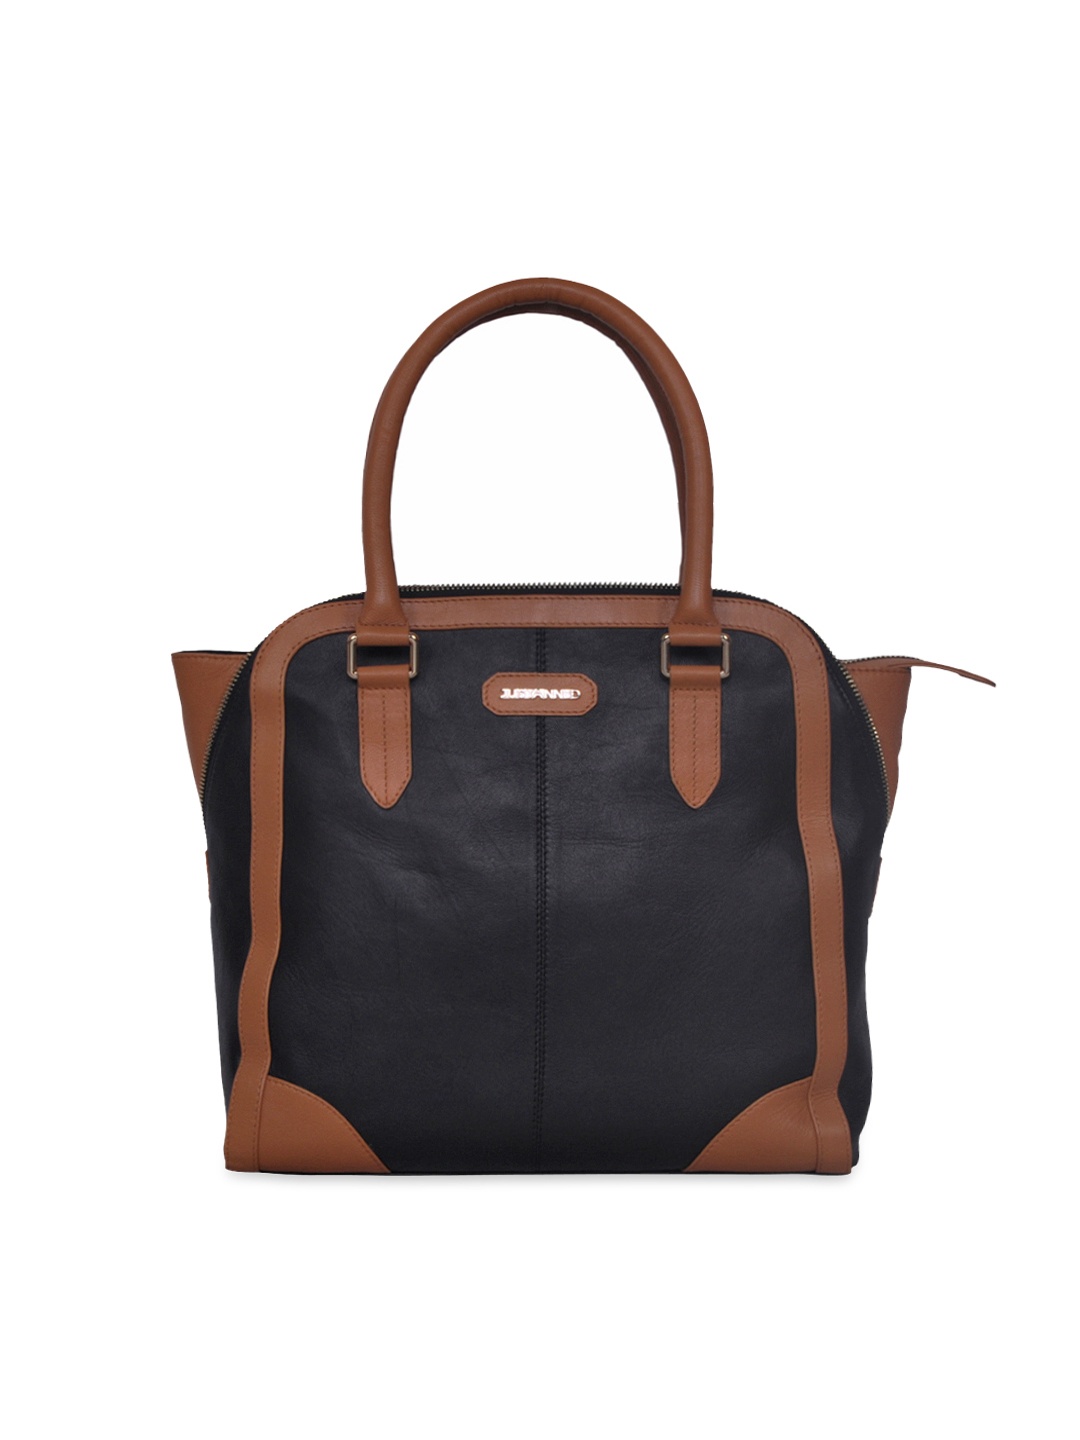 Myntra Justanned Women Black & Brown Leather Tote Bag 662651 | Buy Myntra Justanned Tote Bags at ...